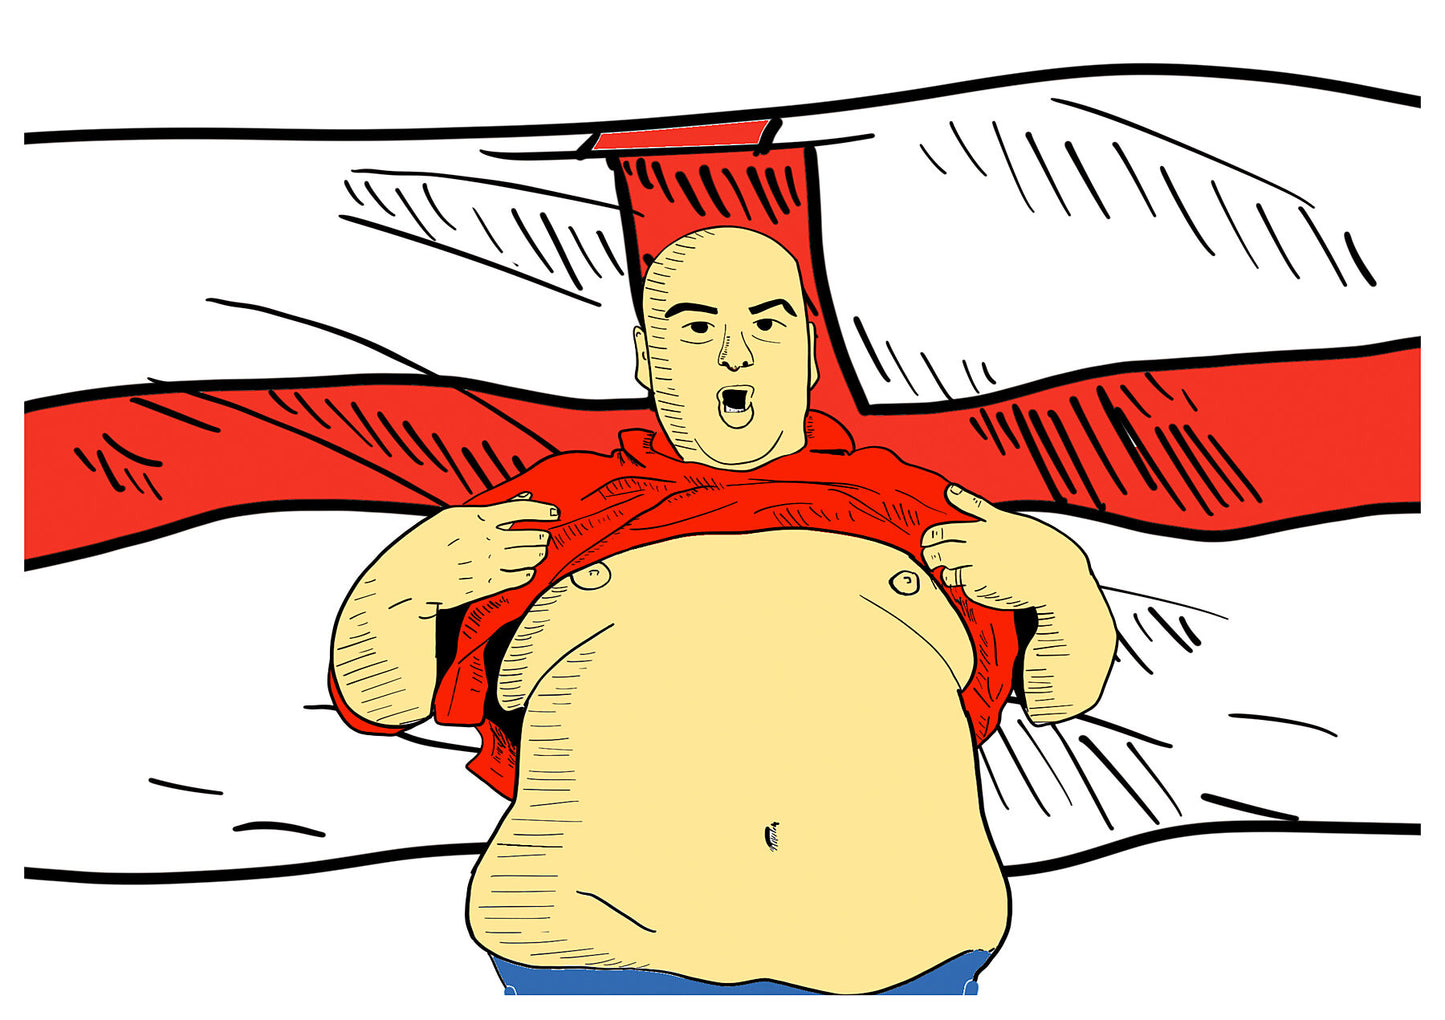 Big, bald football fan lifting up his top in front of an England flag